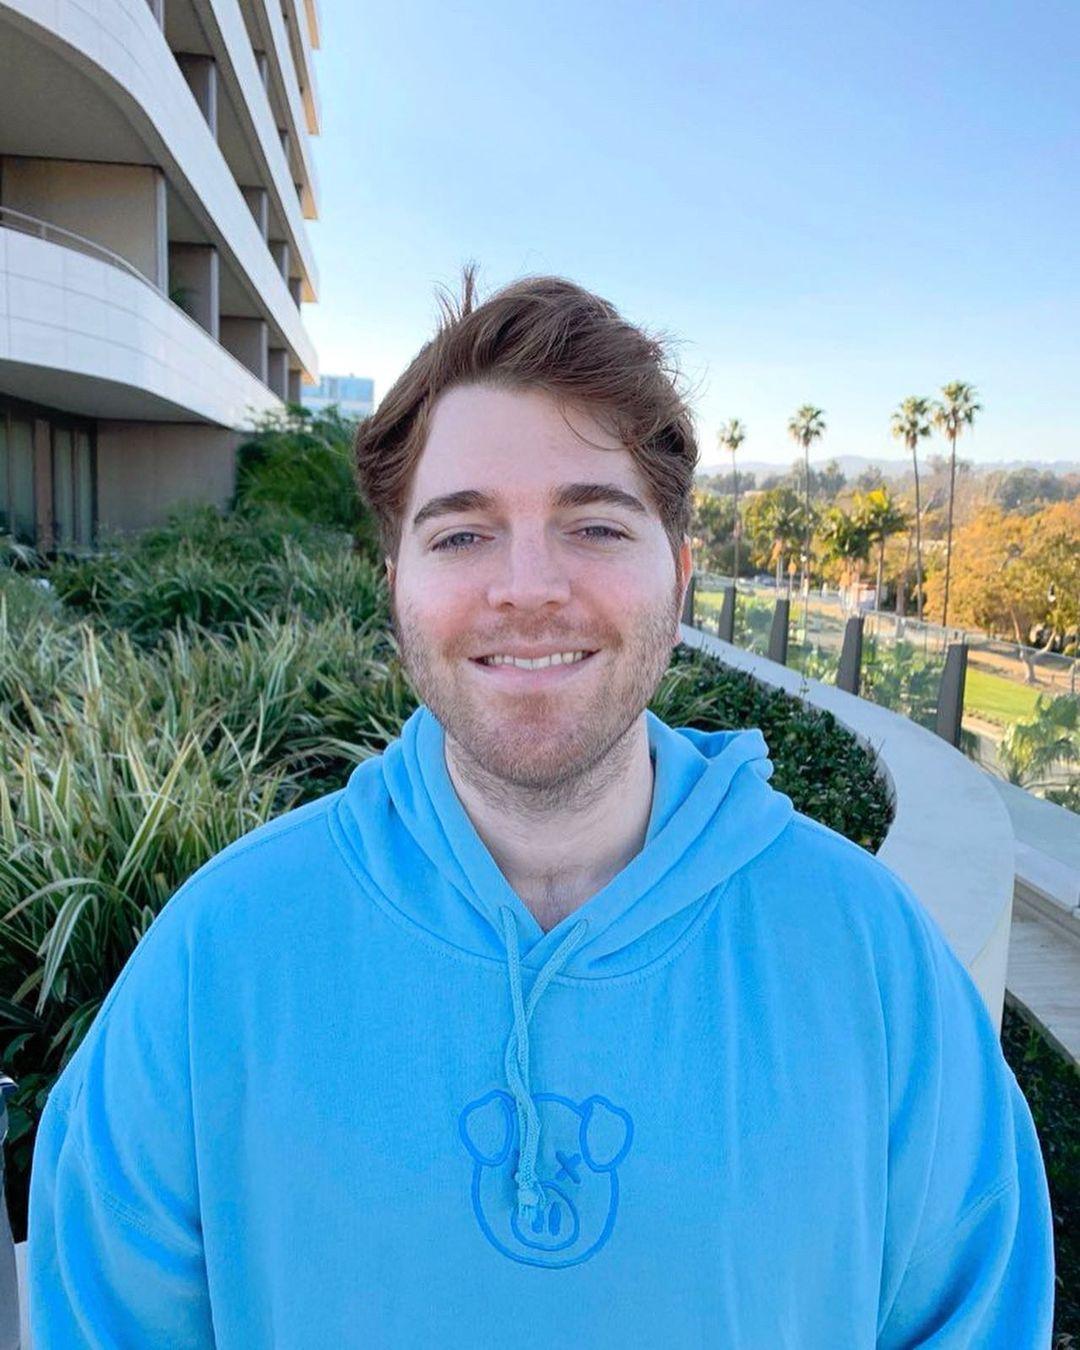 A photo showing Shane Dawson rocking a light blue color hoodie with a smile on his face.